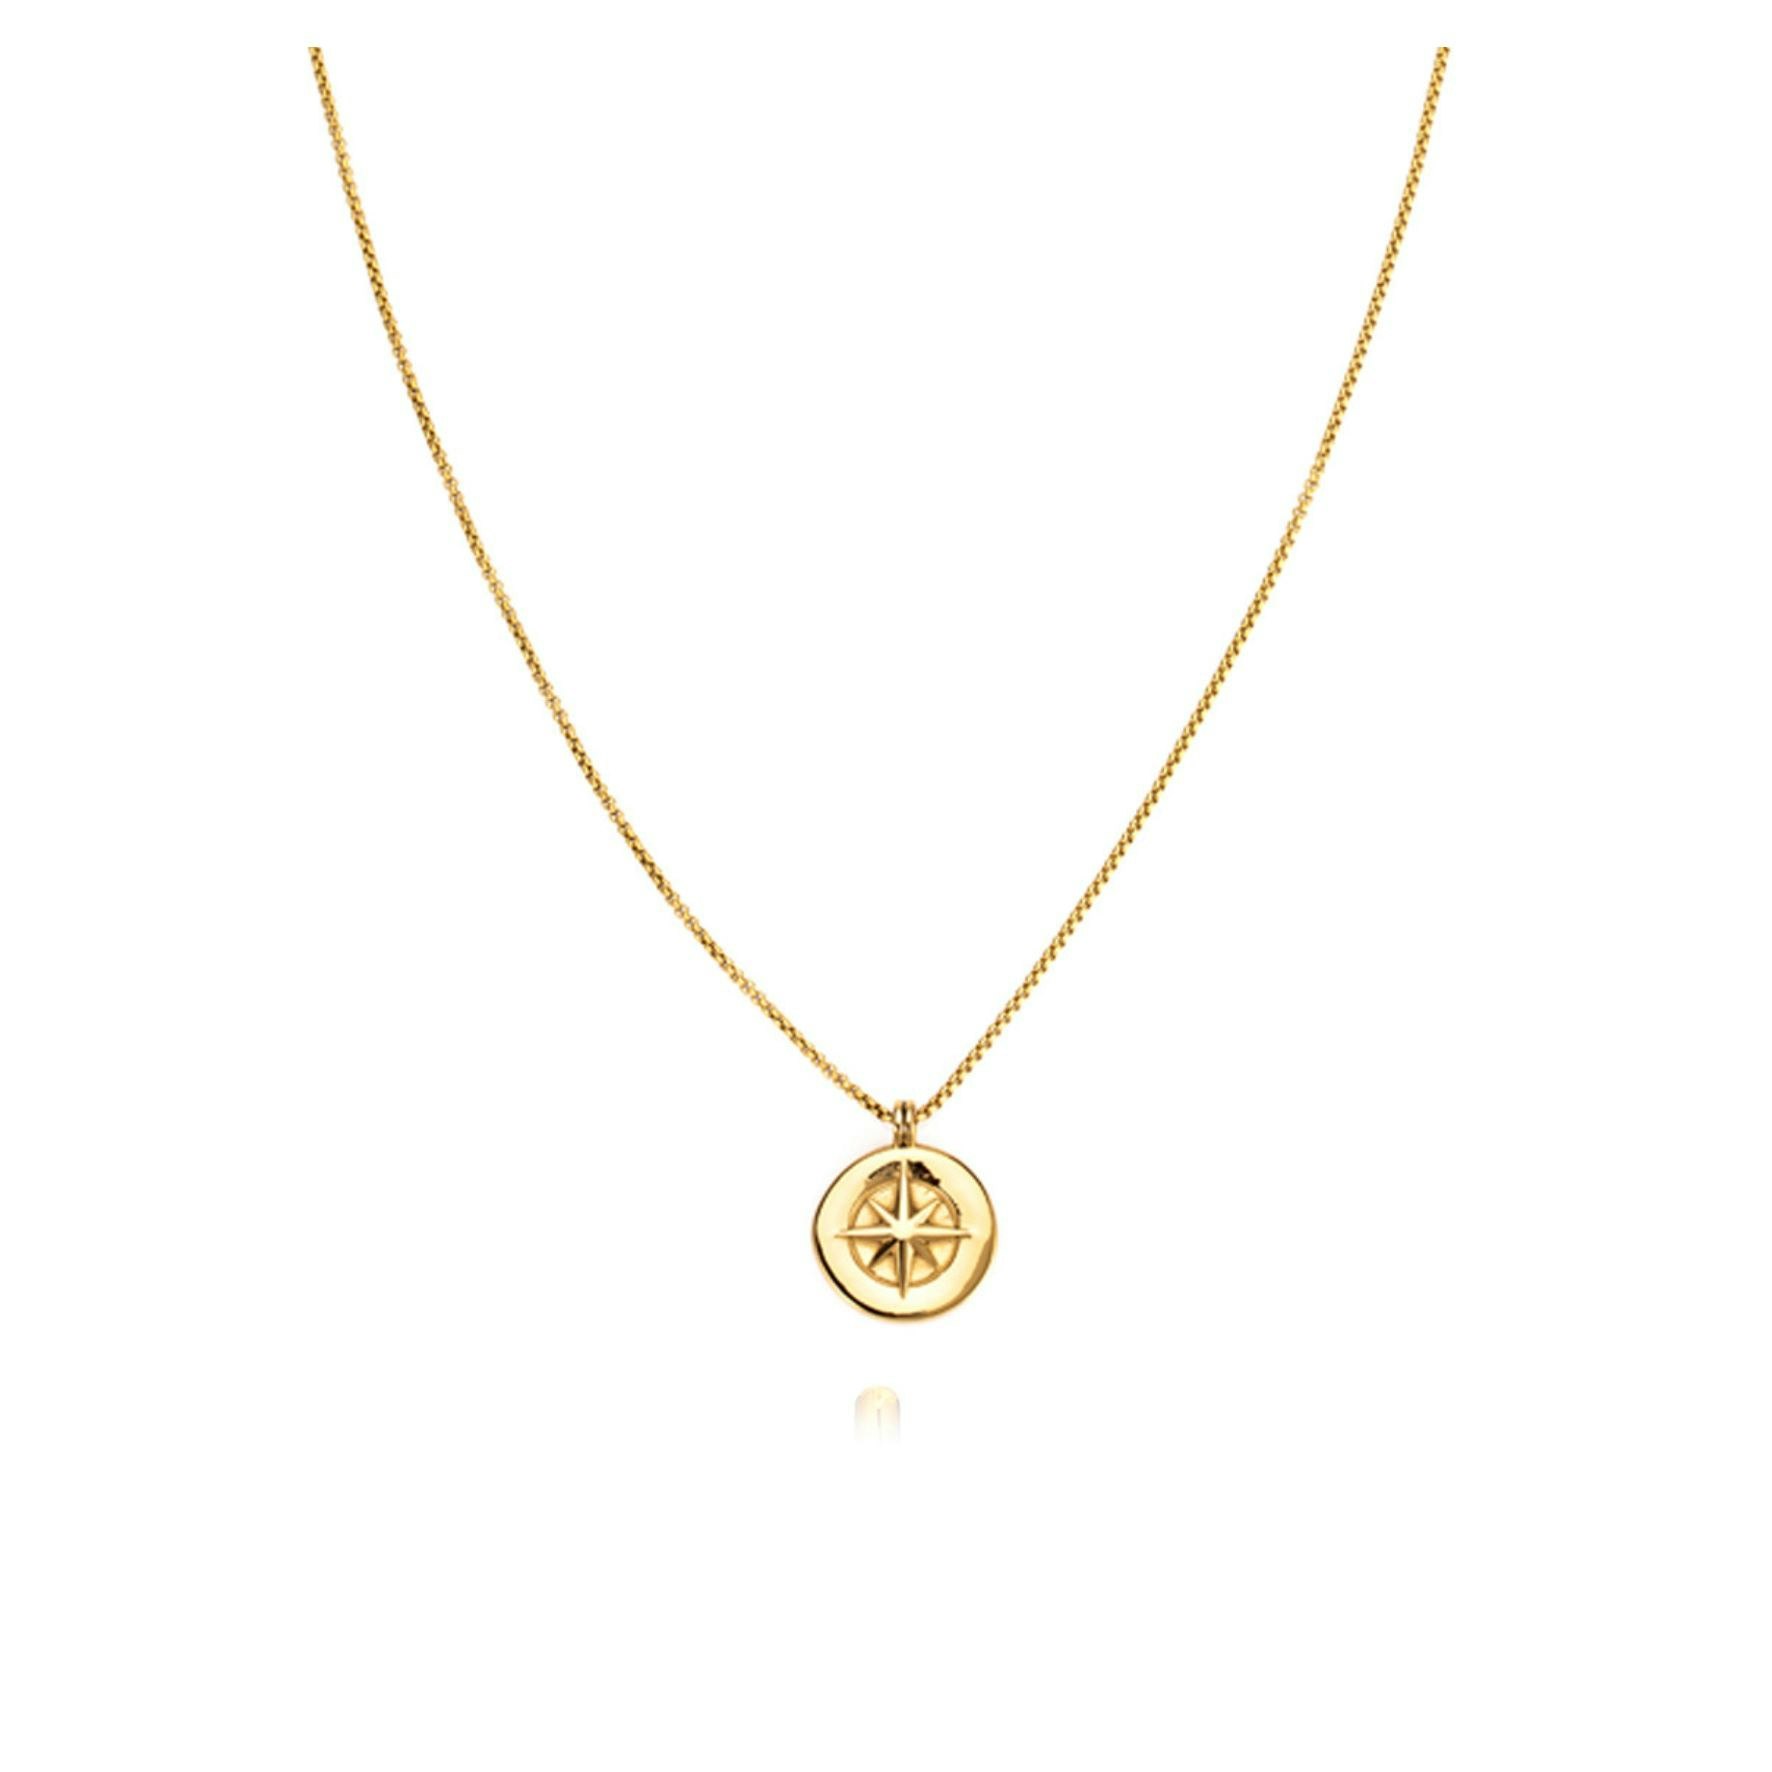 Small Compass Necklace from SAMIE in Goldplated stainless steel